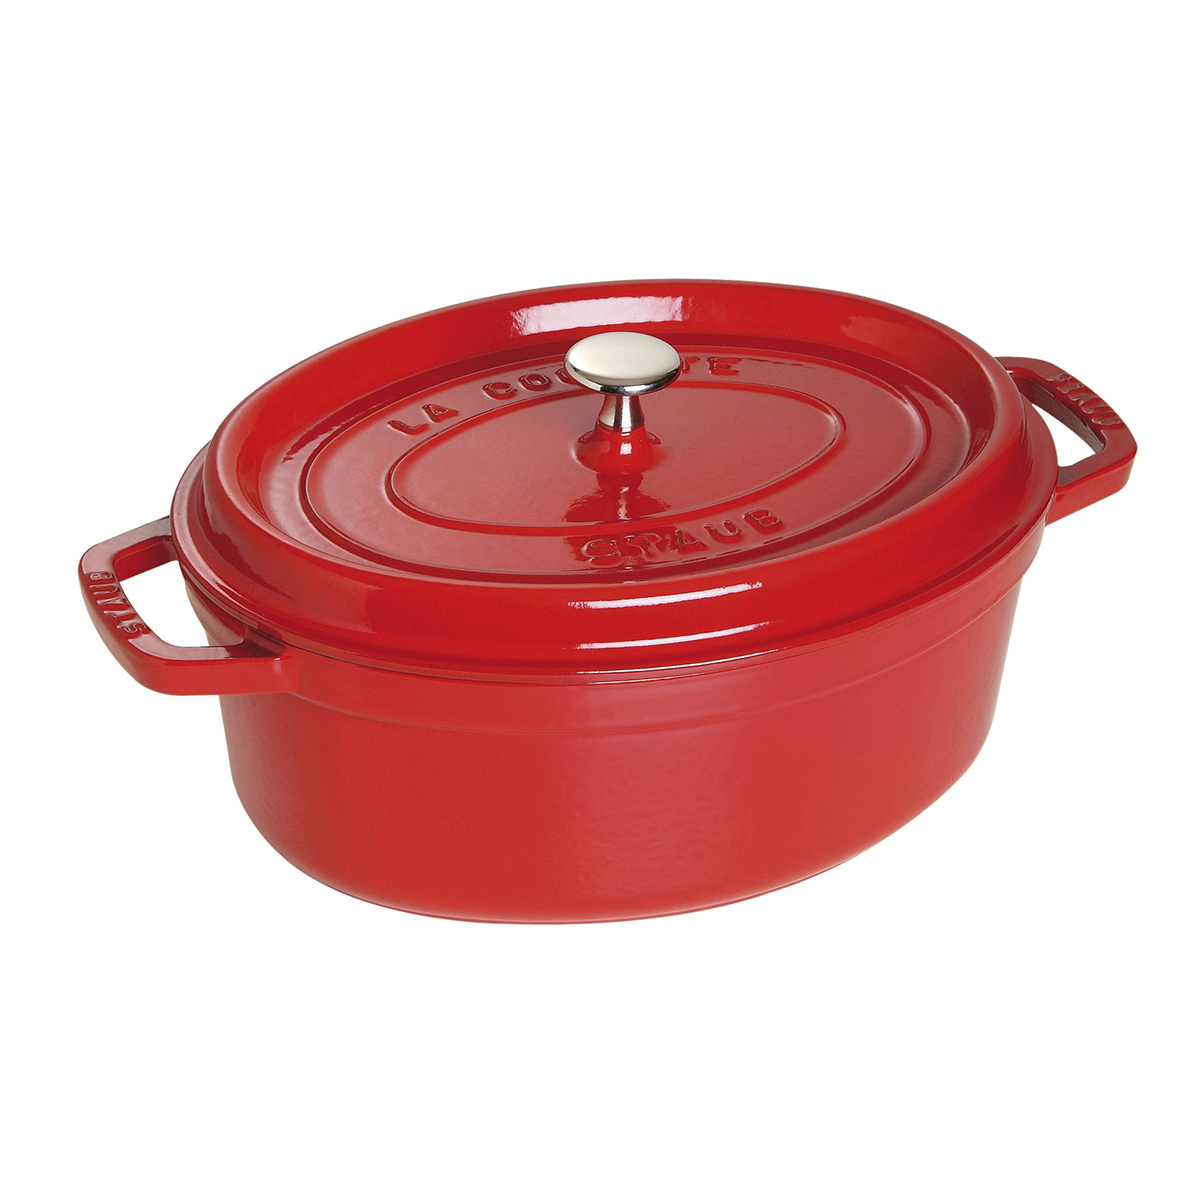 Oval cast iron casserole dish with lid - 2l